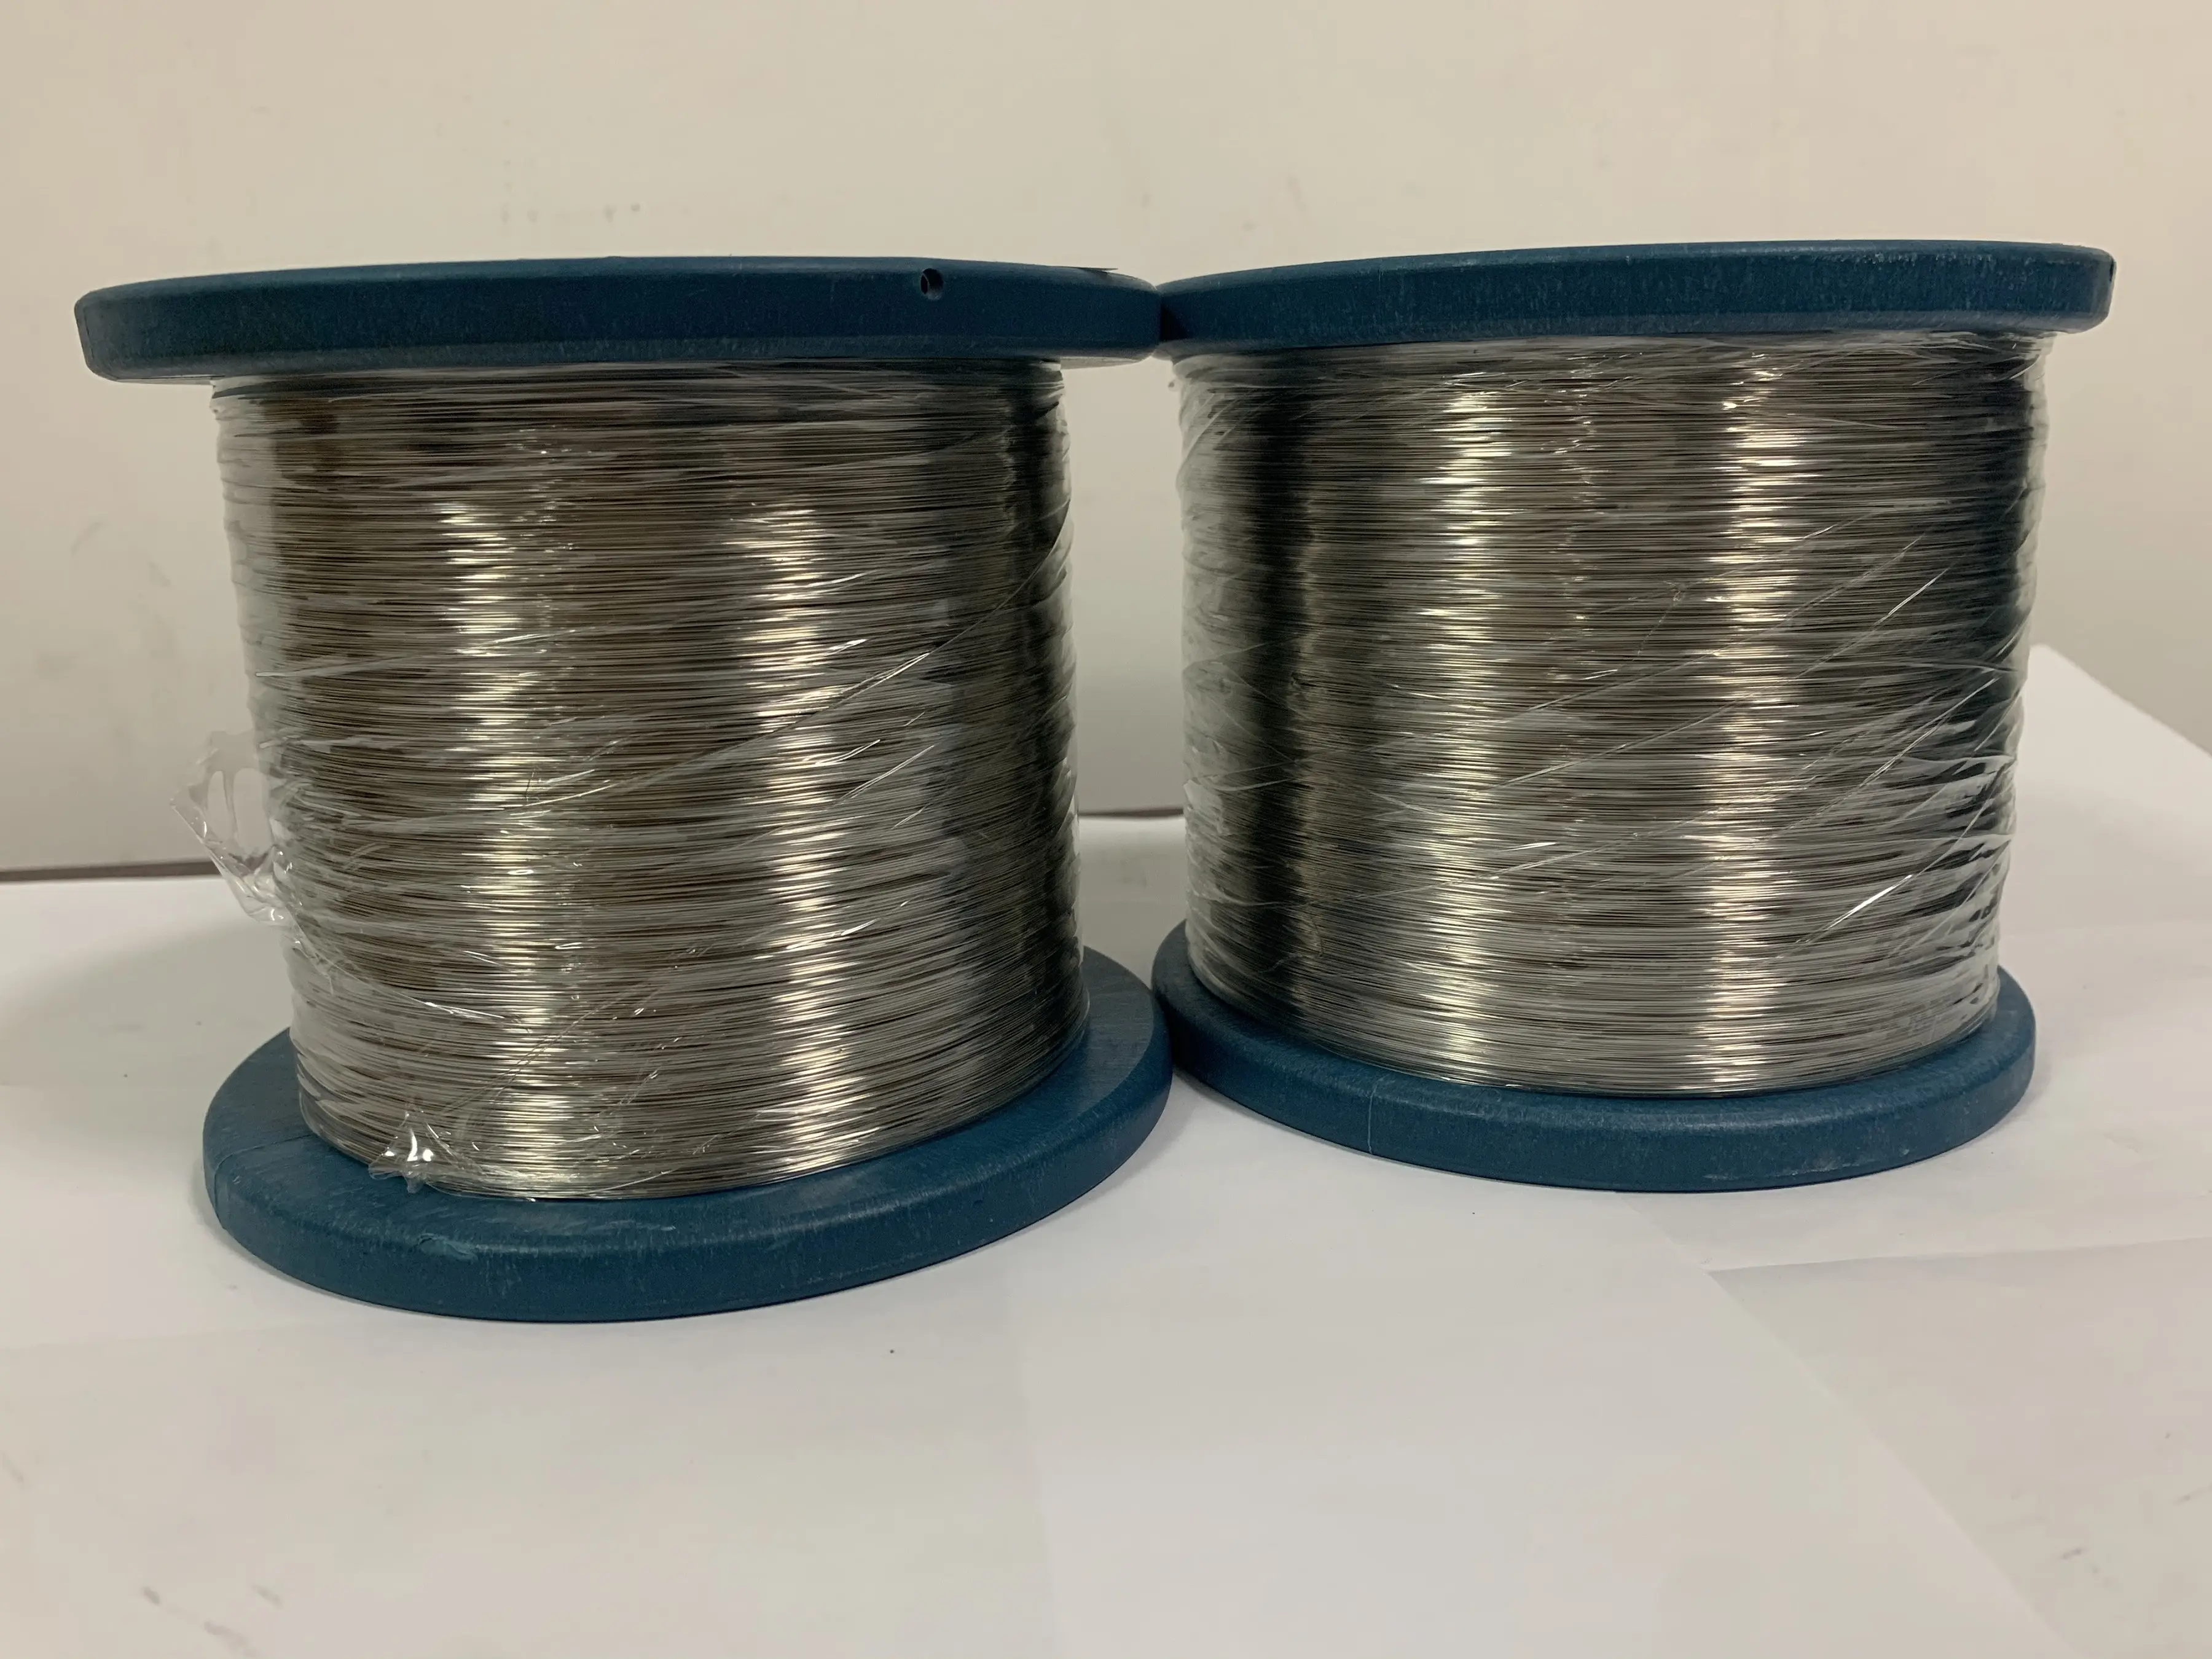 Hot Sale Electroplating Nickel High Quality Plated Bare Copper Enameled Wire Material Electric For Cable